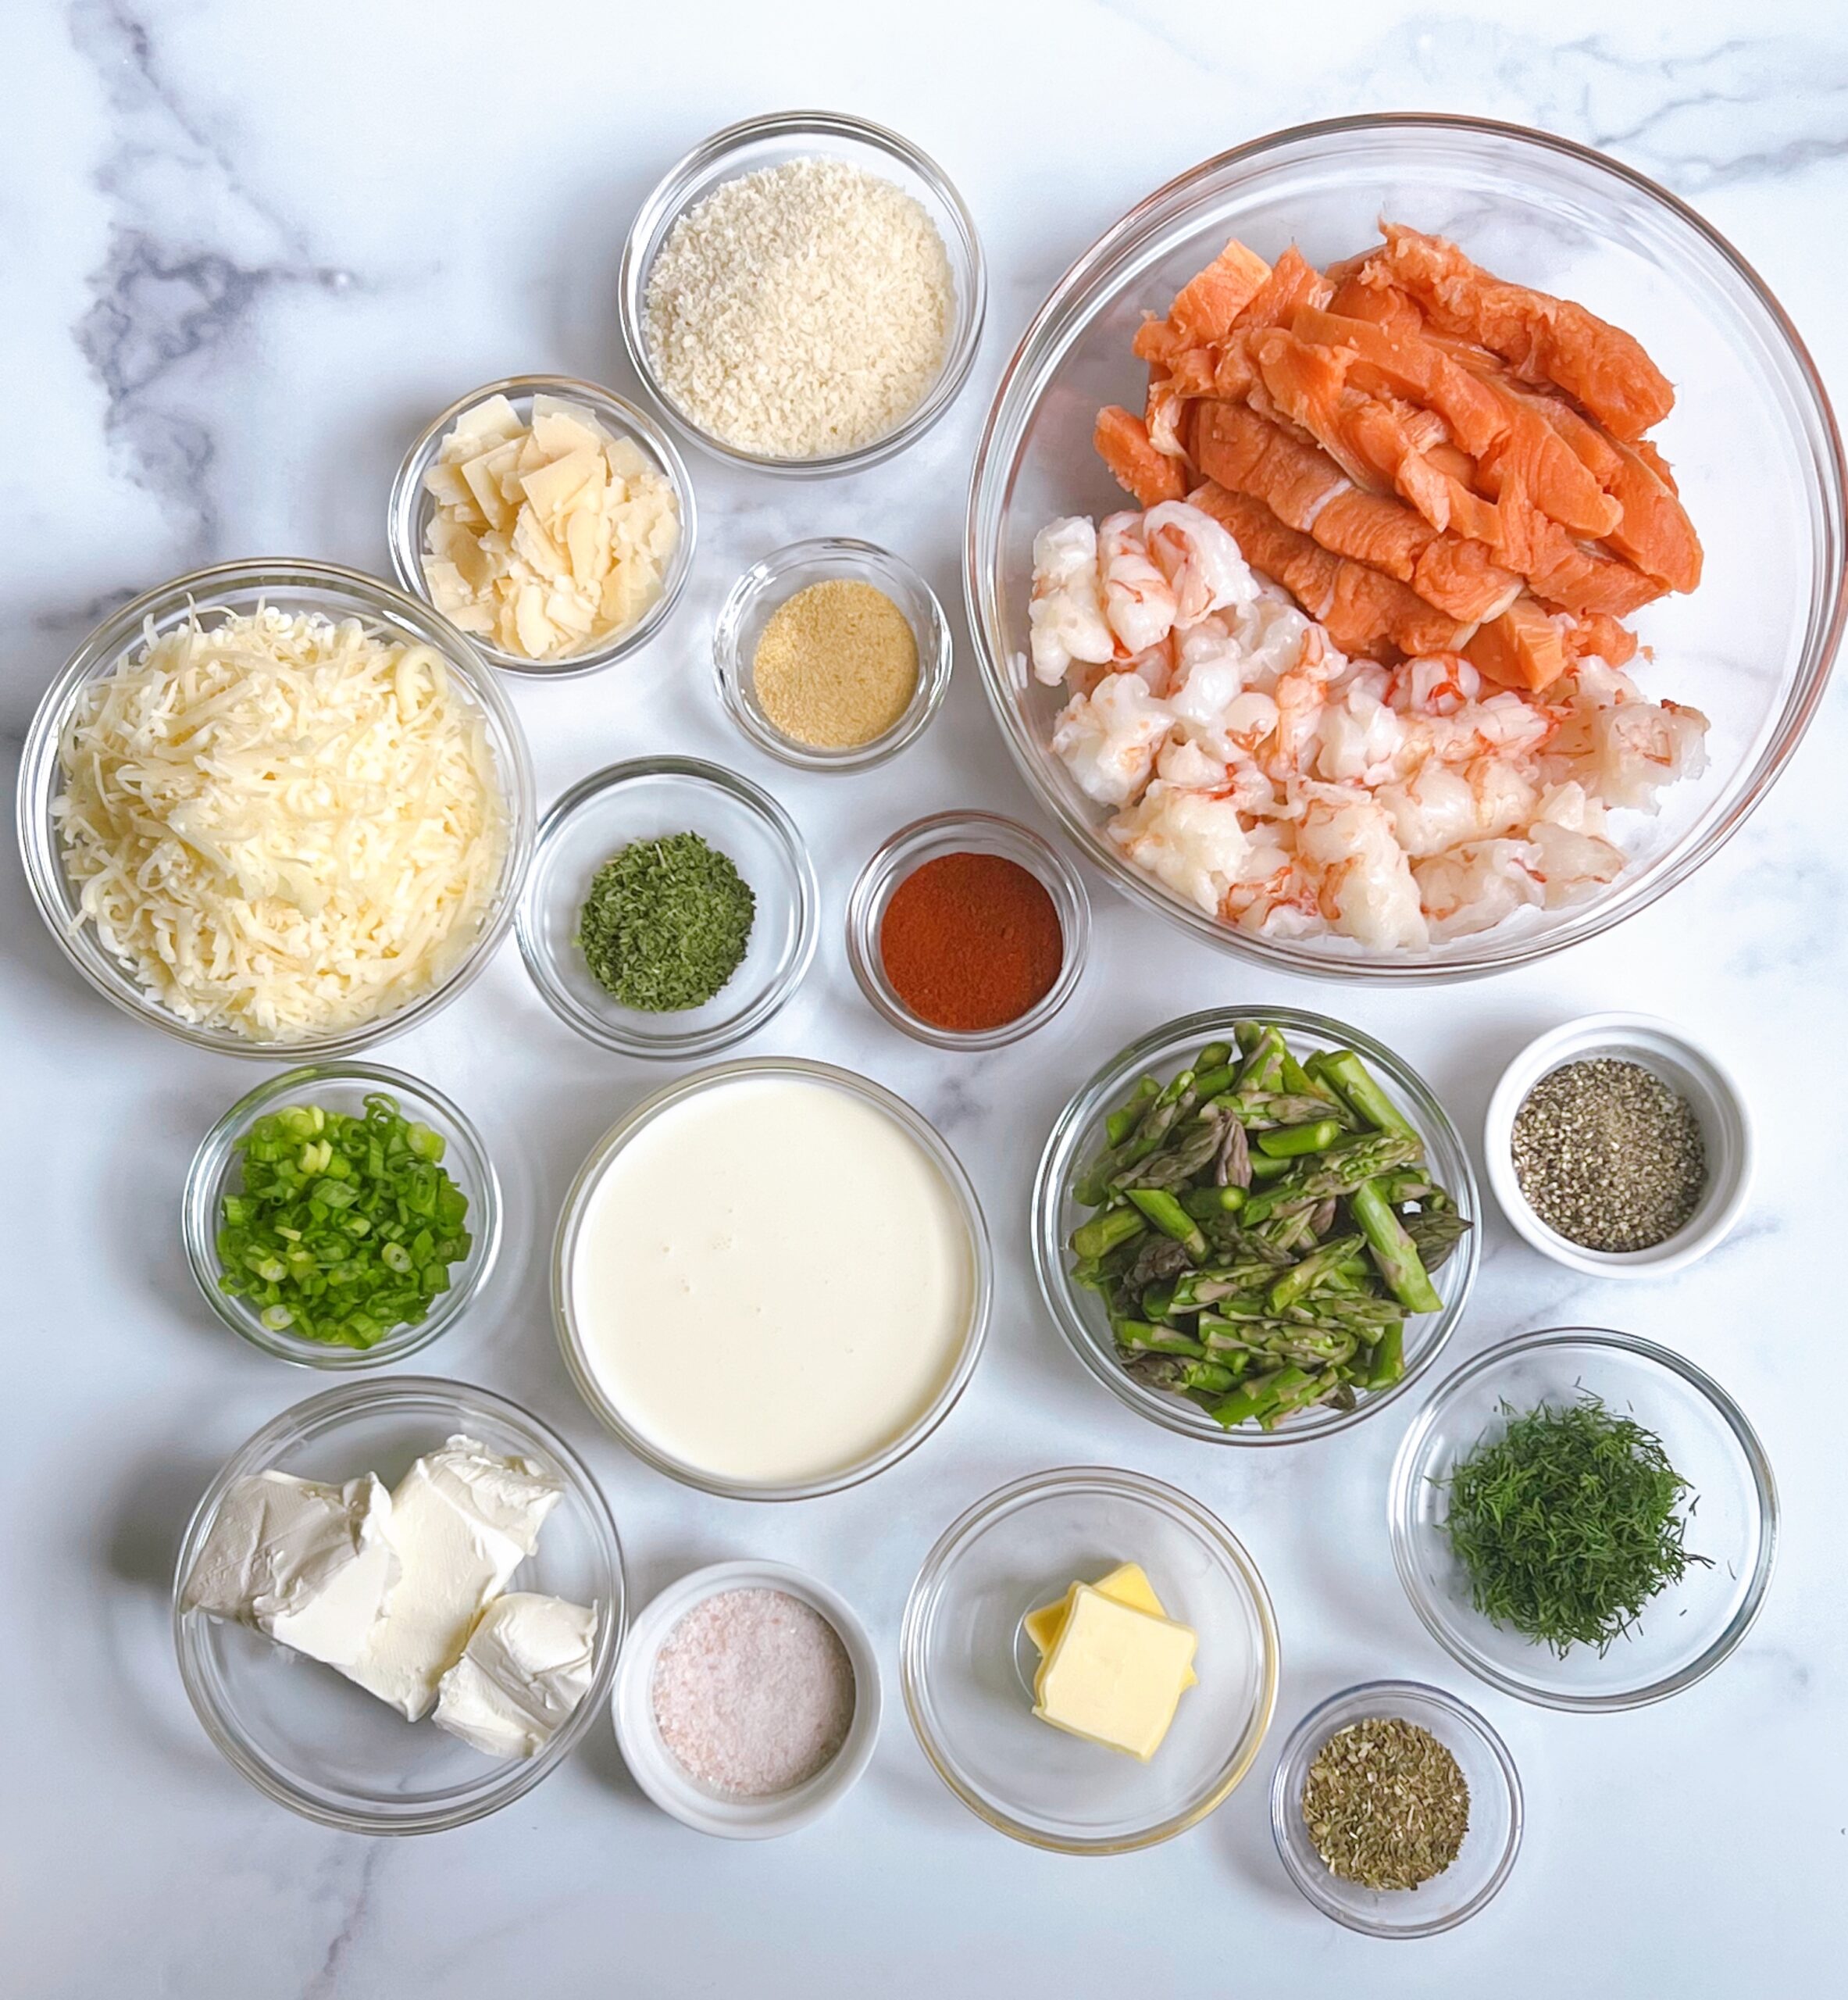 Overhead view of Shrimp and Salmon Seafood Casserole ingredients in individual glass bowls.